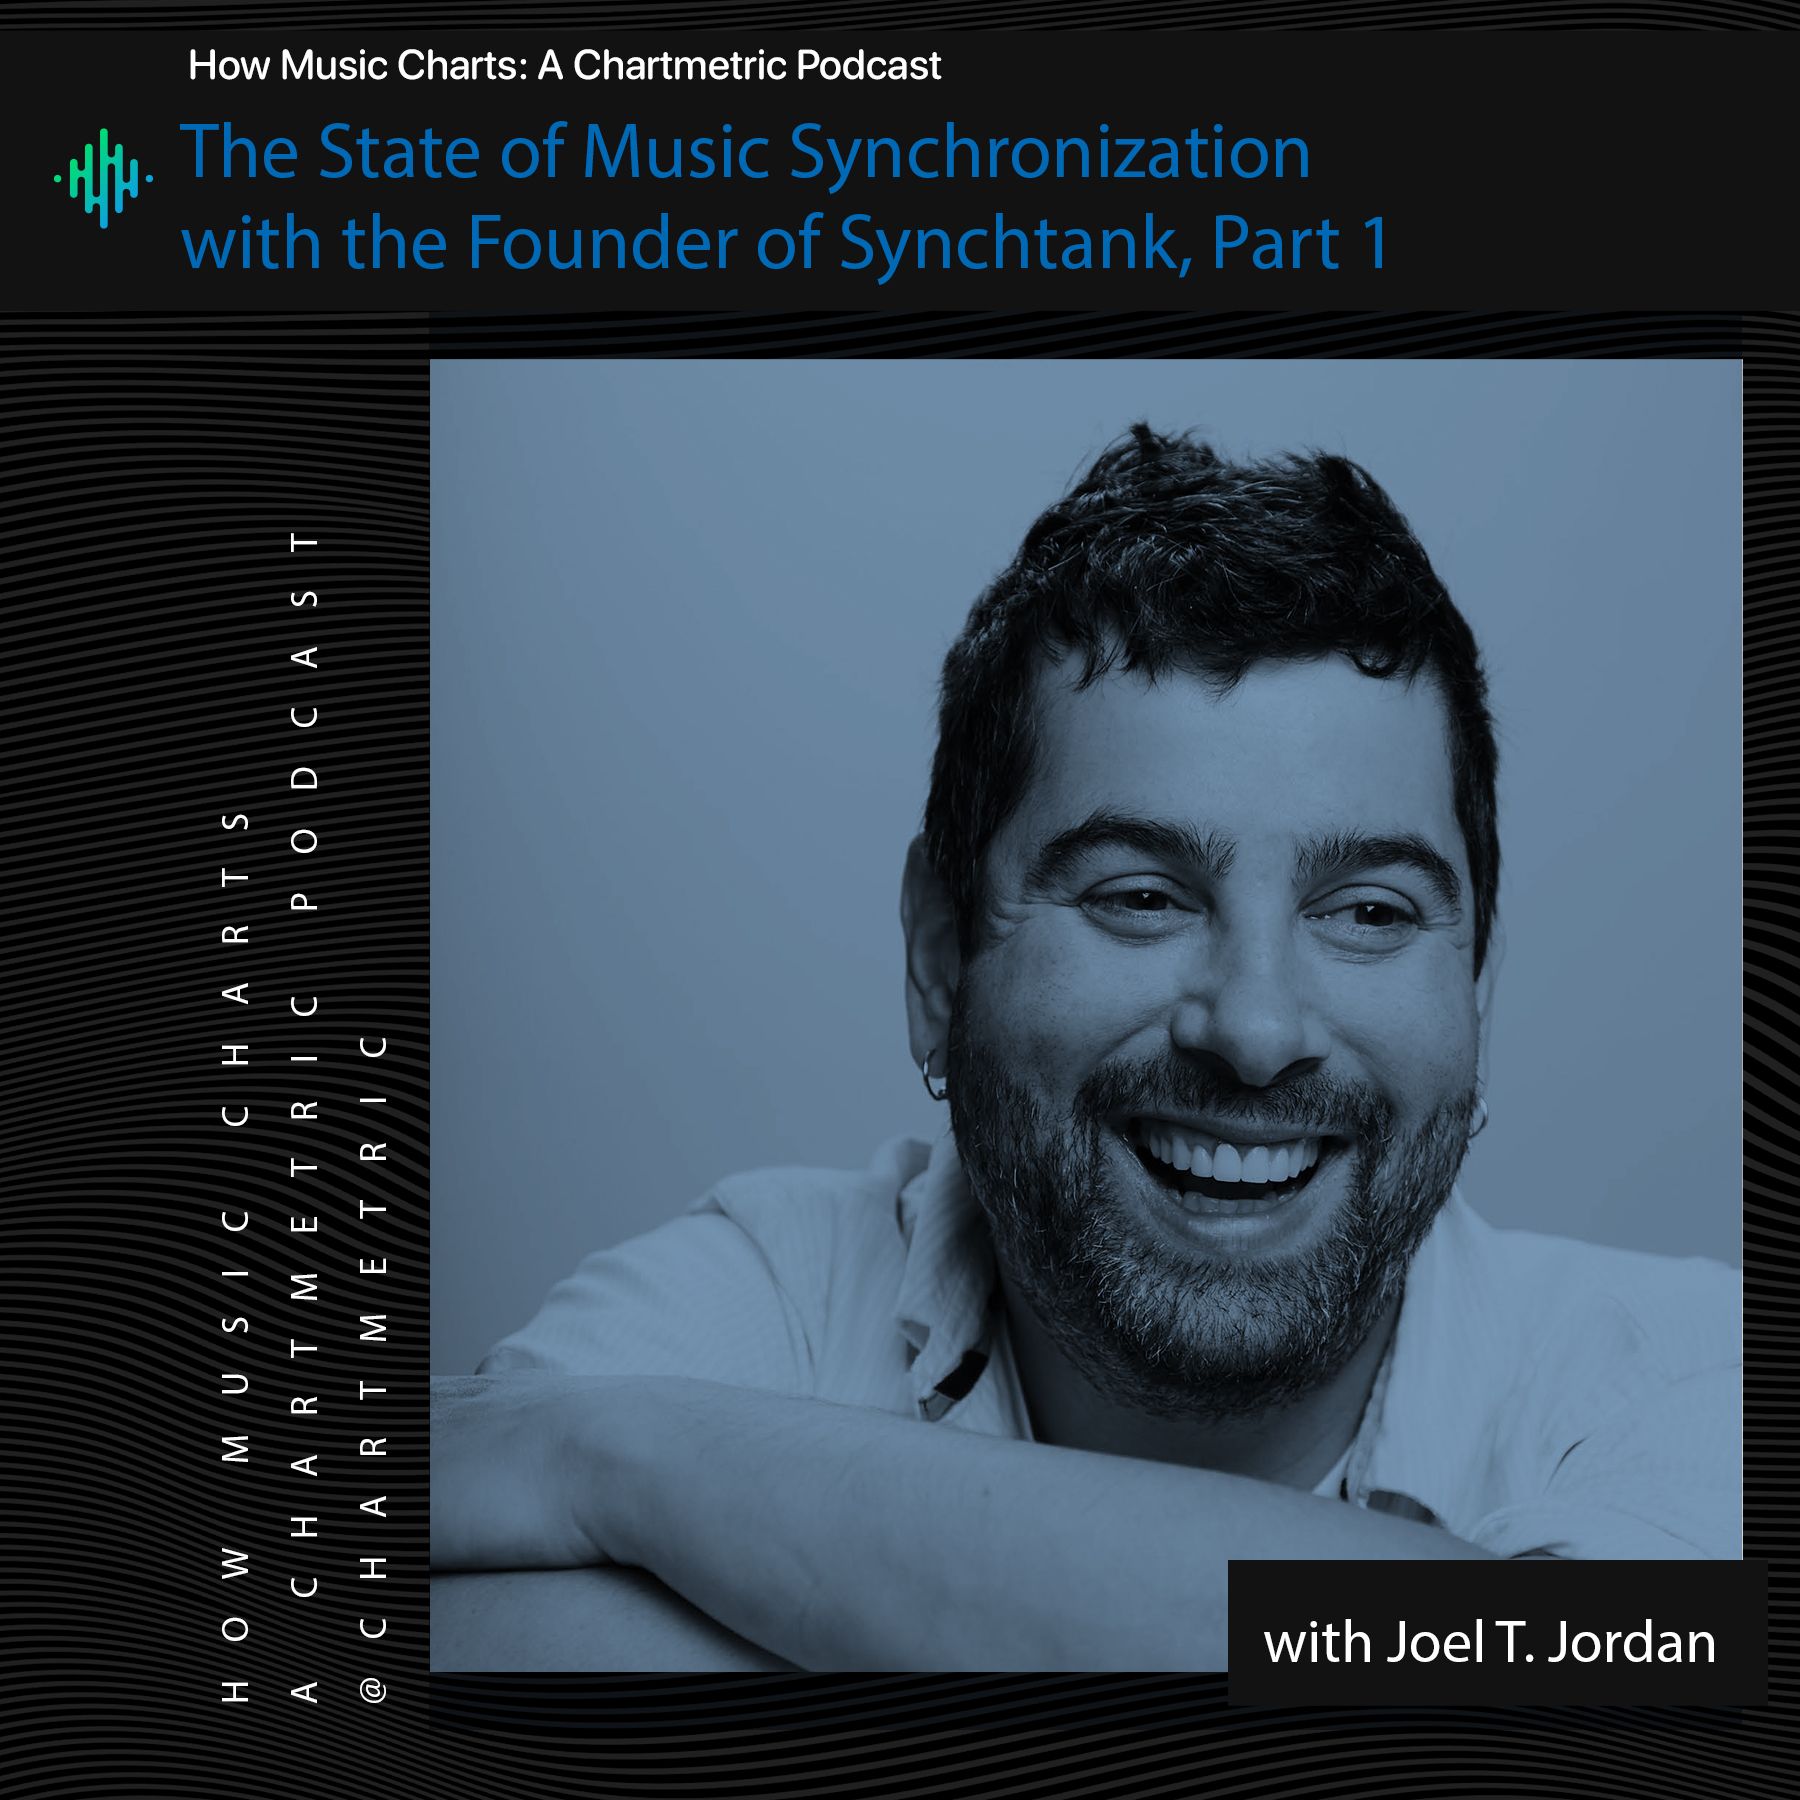 The State of Music Synchronization With Synchtank Founder Joel T. Jordan, Part 1